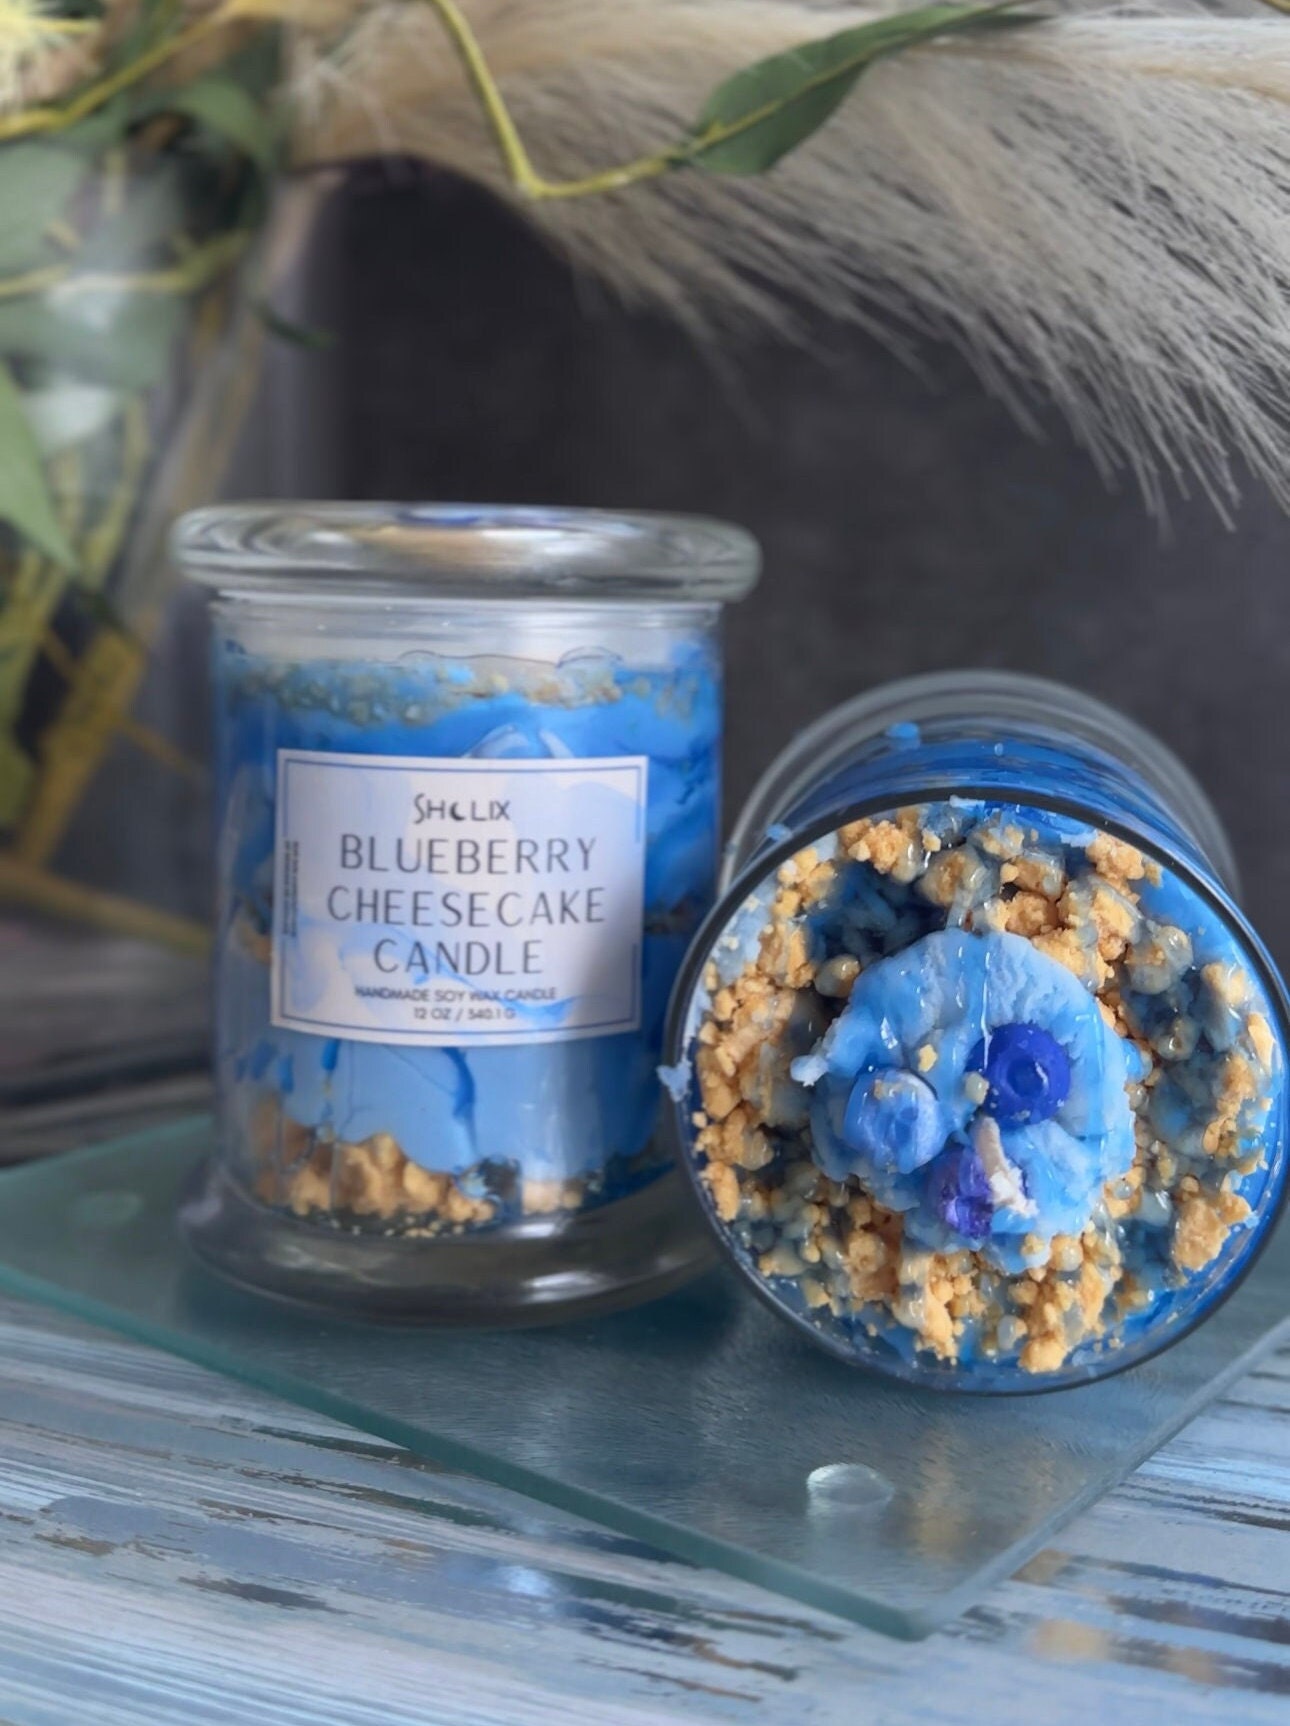 Deja-Blue: Blueberry Cheesecake Scented Candle from SkyeLight